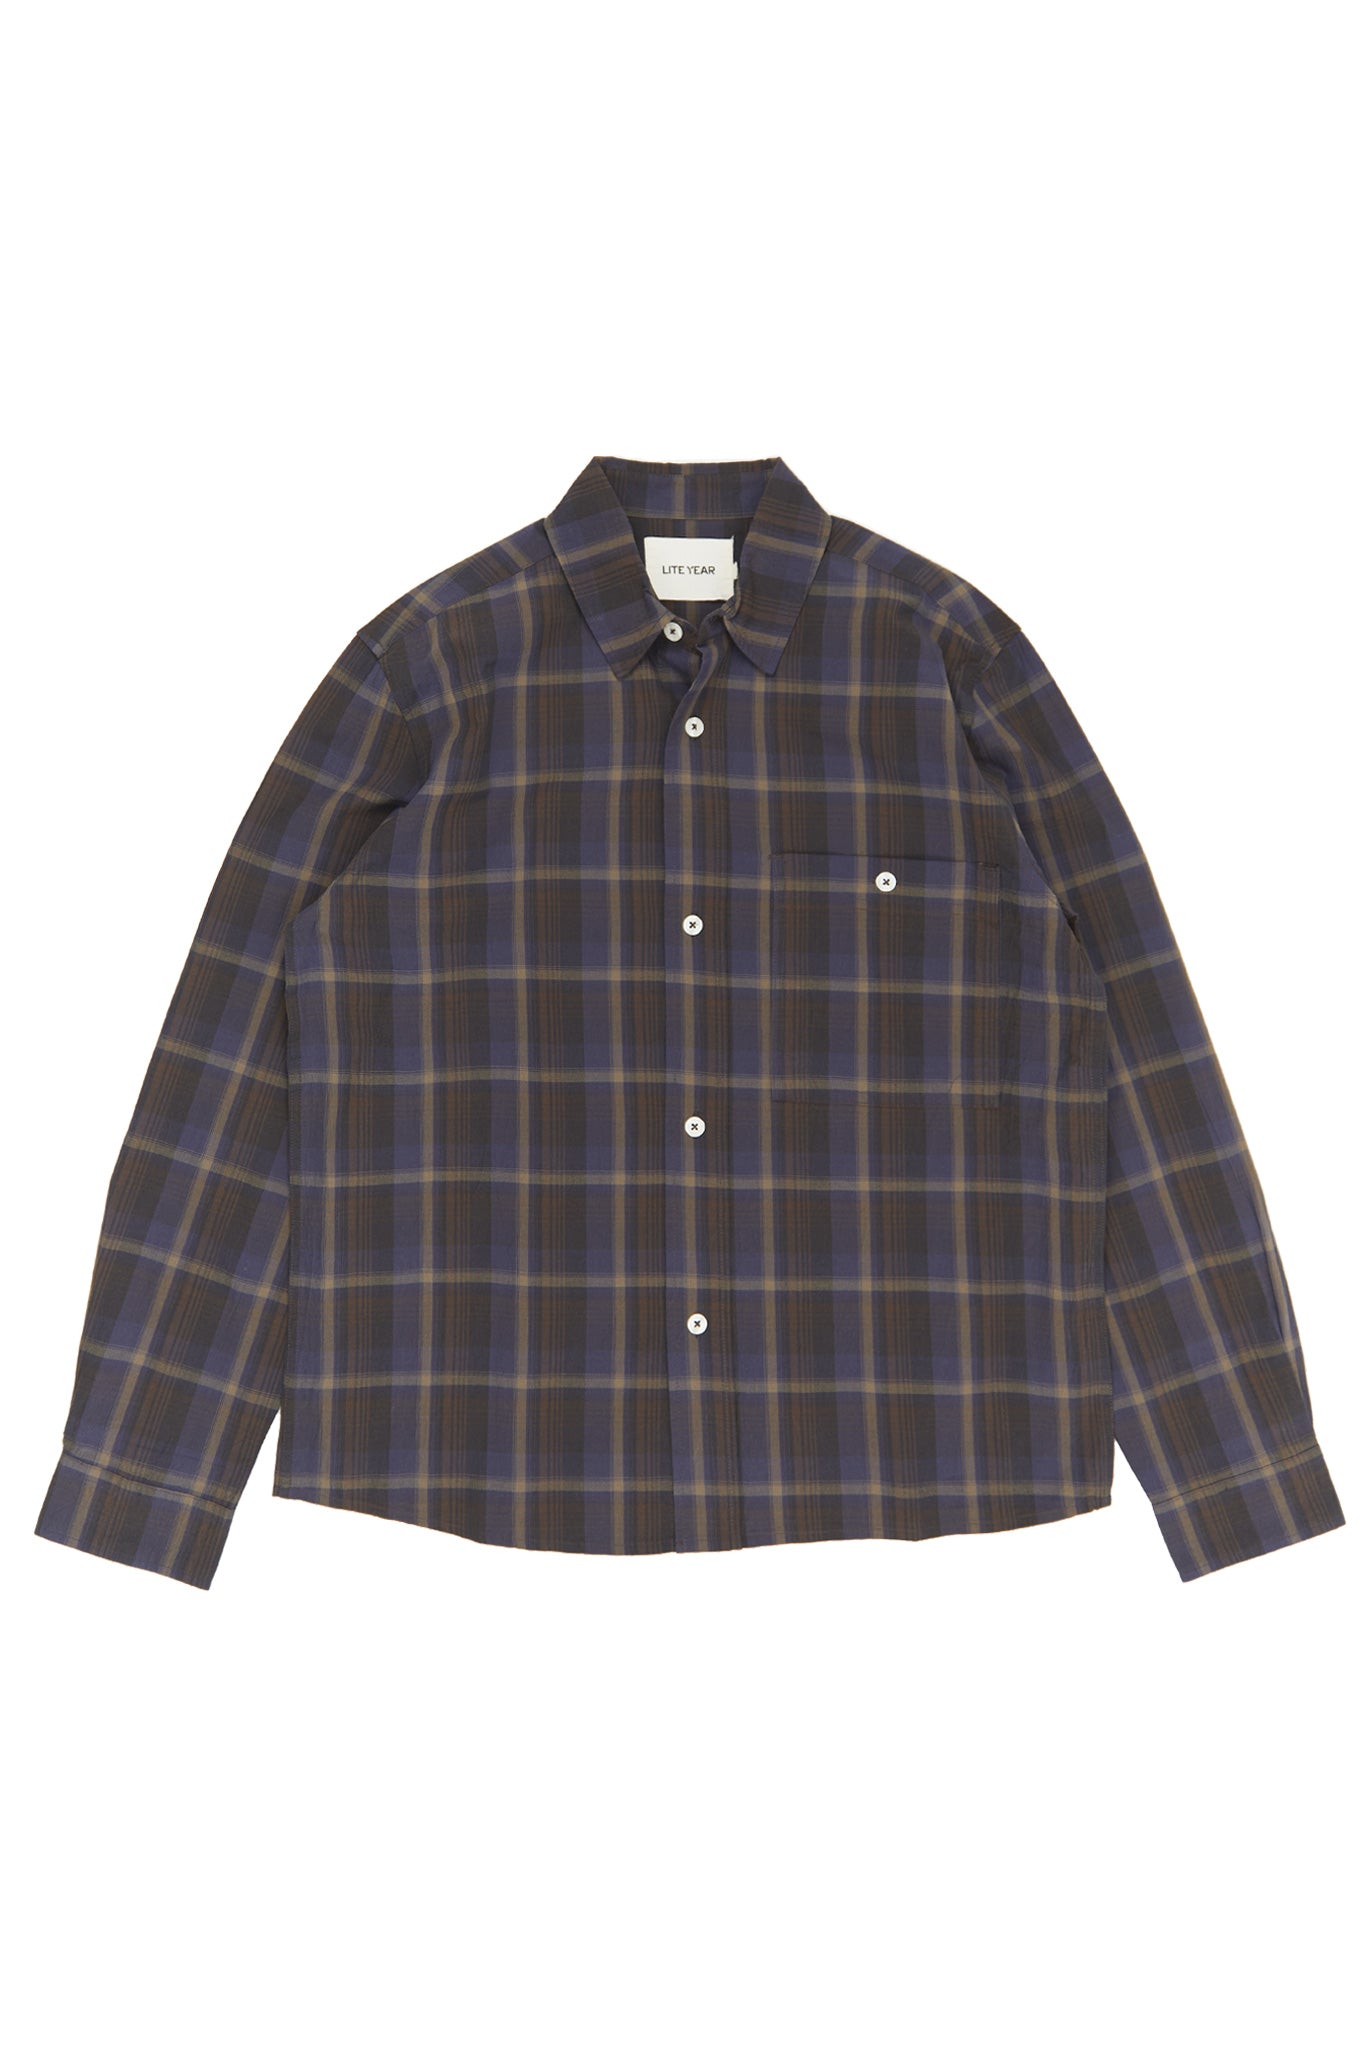 Relaxed Button Up Shirt - Navy plaid